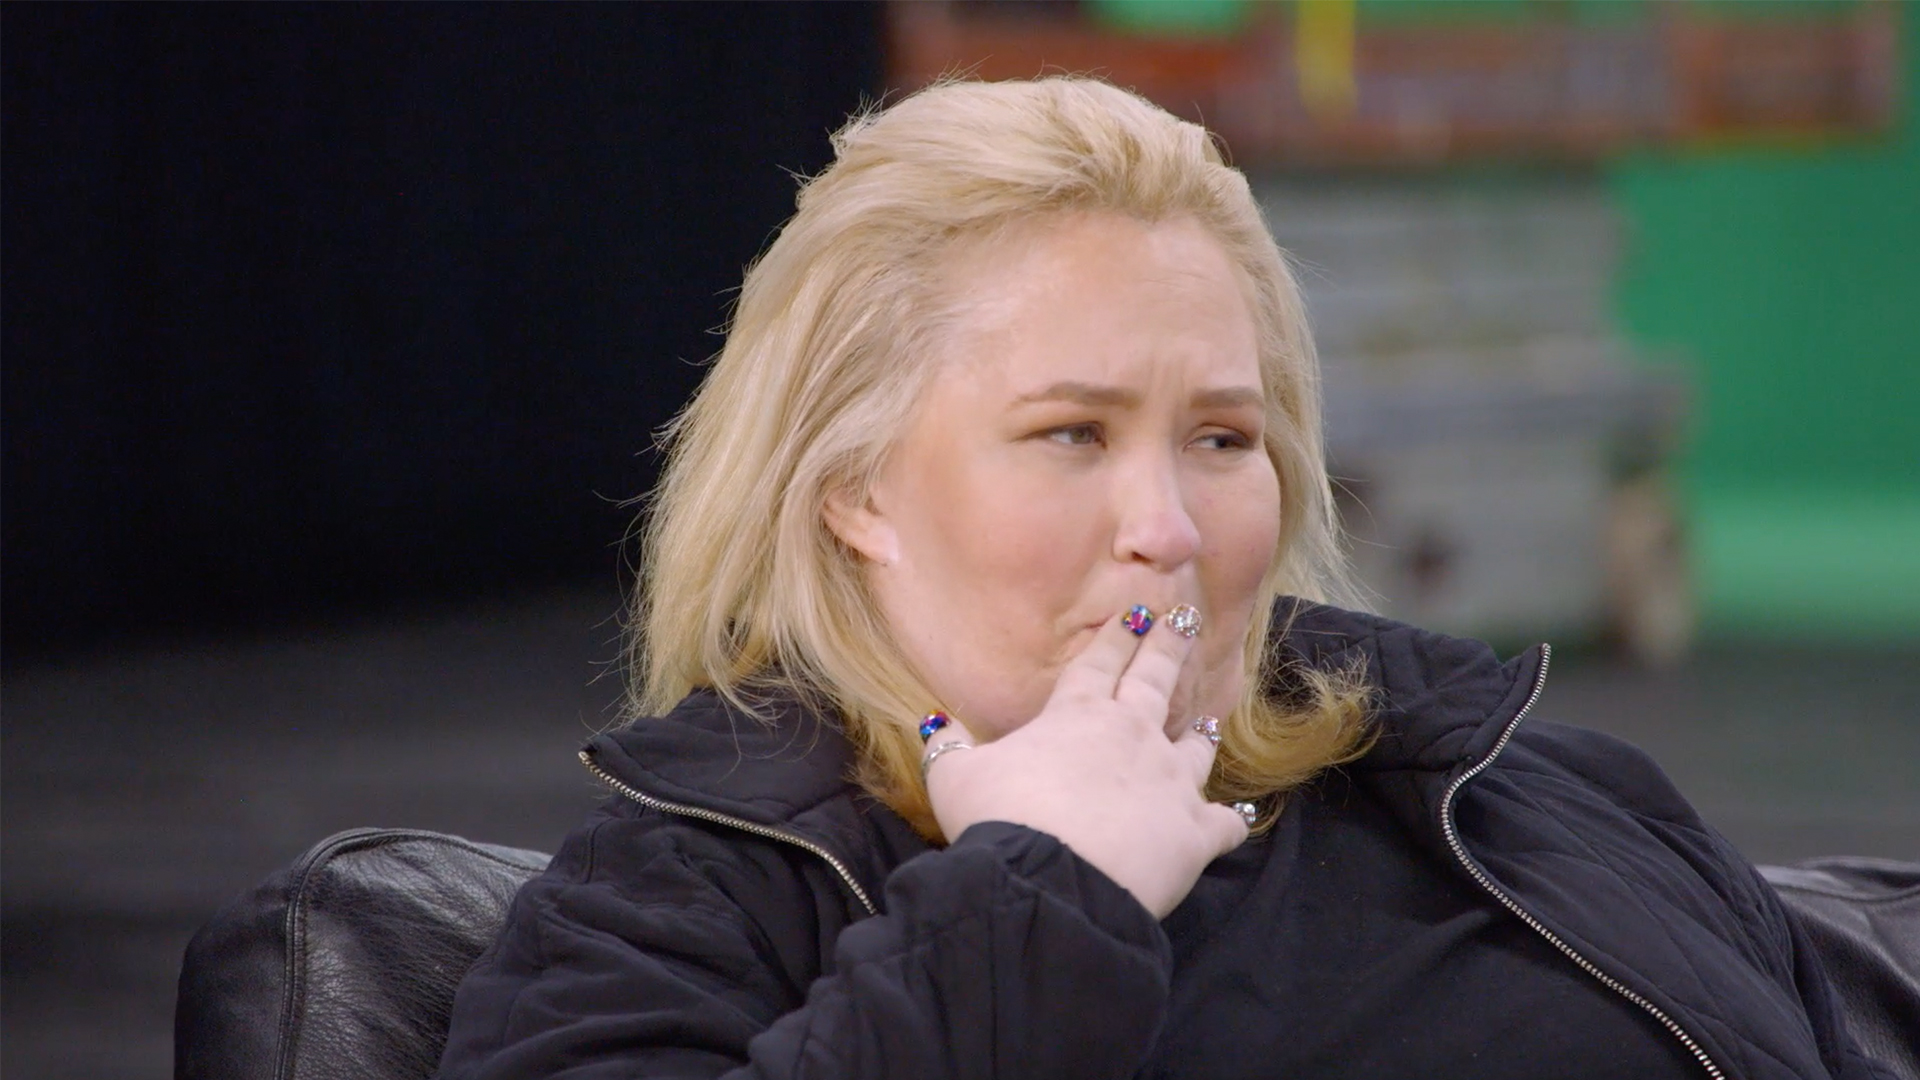 Watch Sneak Peek: Mama June's Emotional Family Reunion | Mama June: From Not to Hot Video Extras